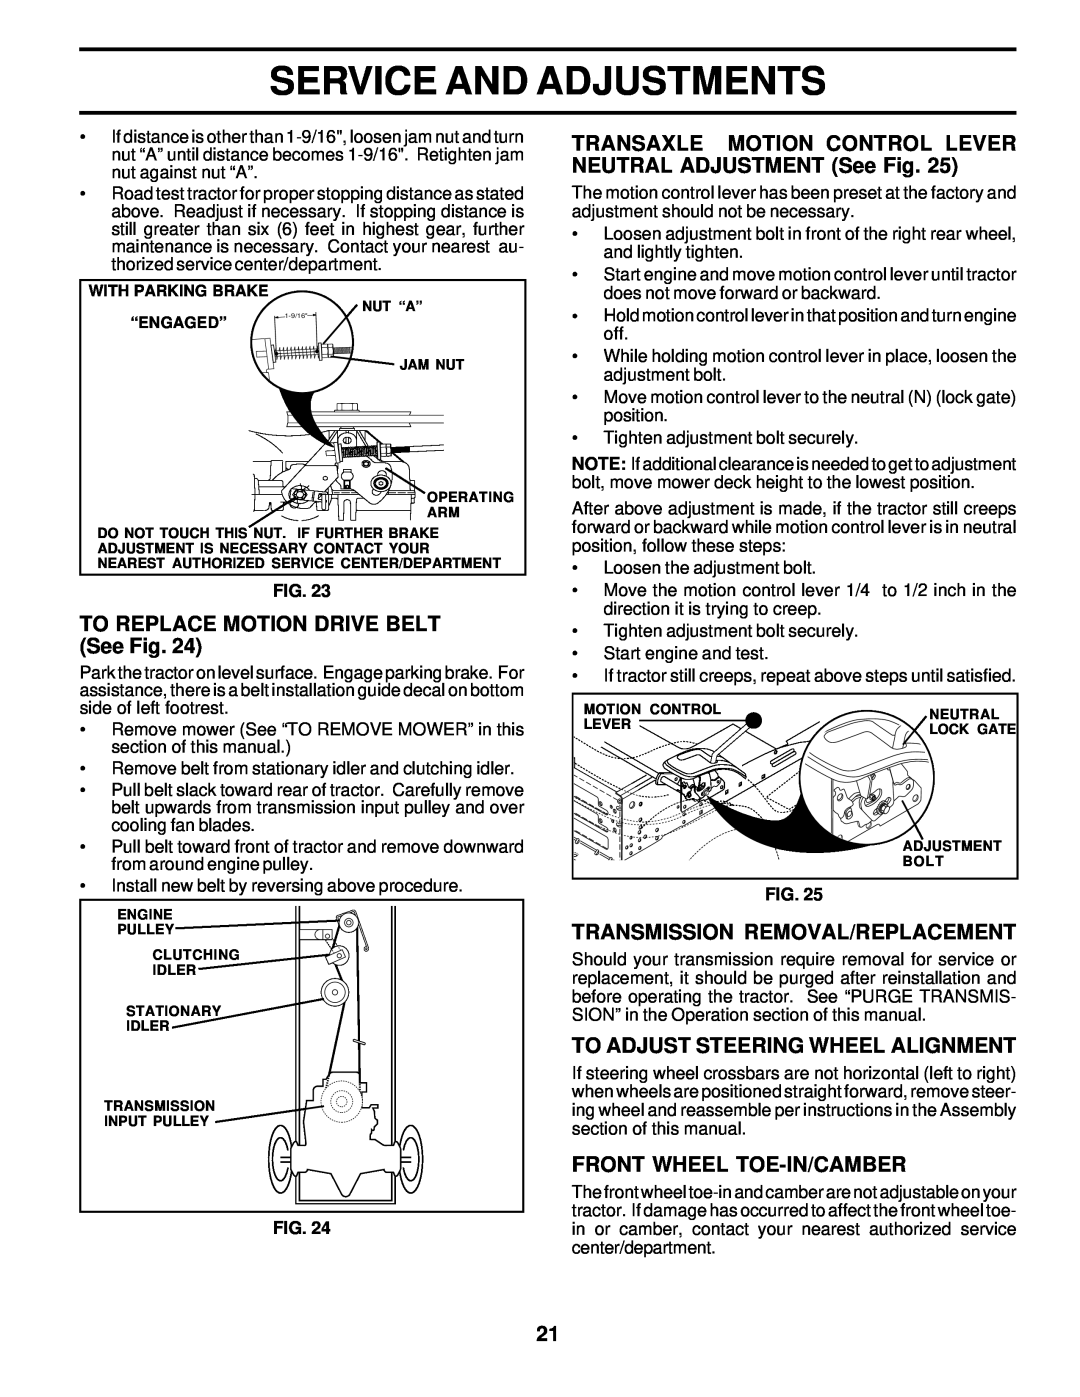 Poulan 176085 owner manual TRANSAXLE MOTION CONTROL LEVER NEUTRAL ADJUSTMENT See Fig, TO REPLACE MOTION DRIVE BELT See Fig 